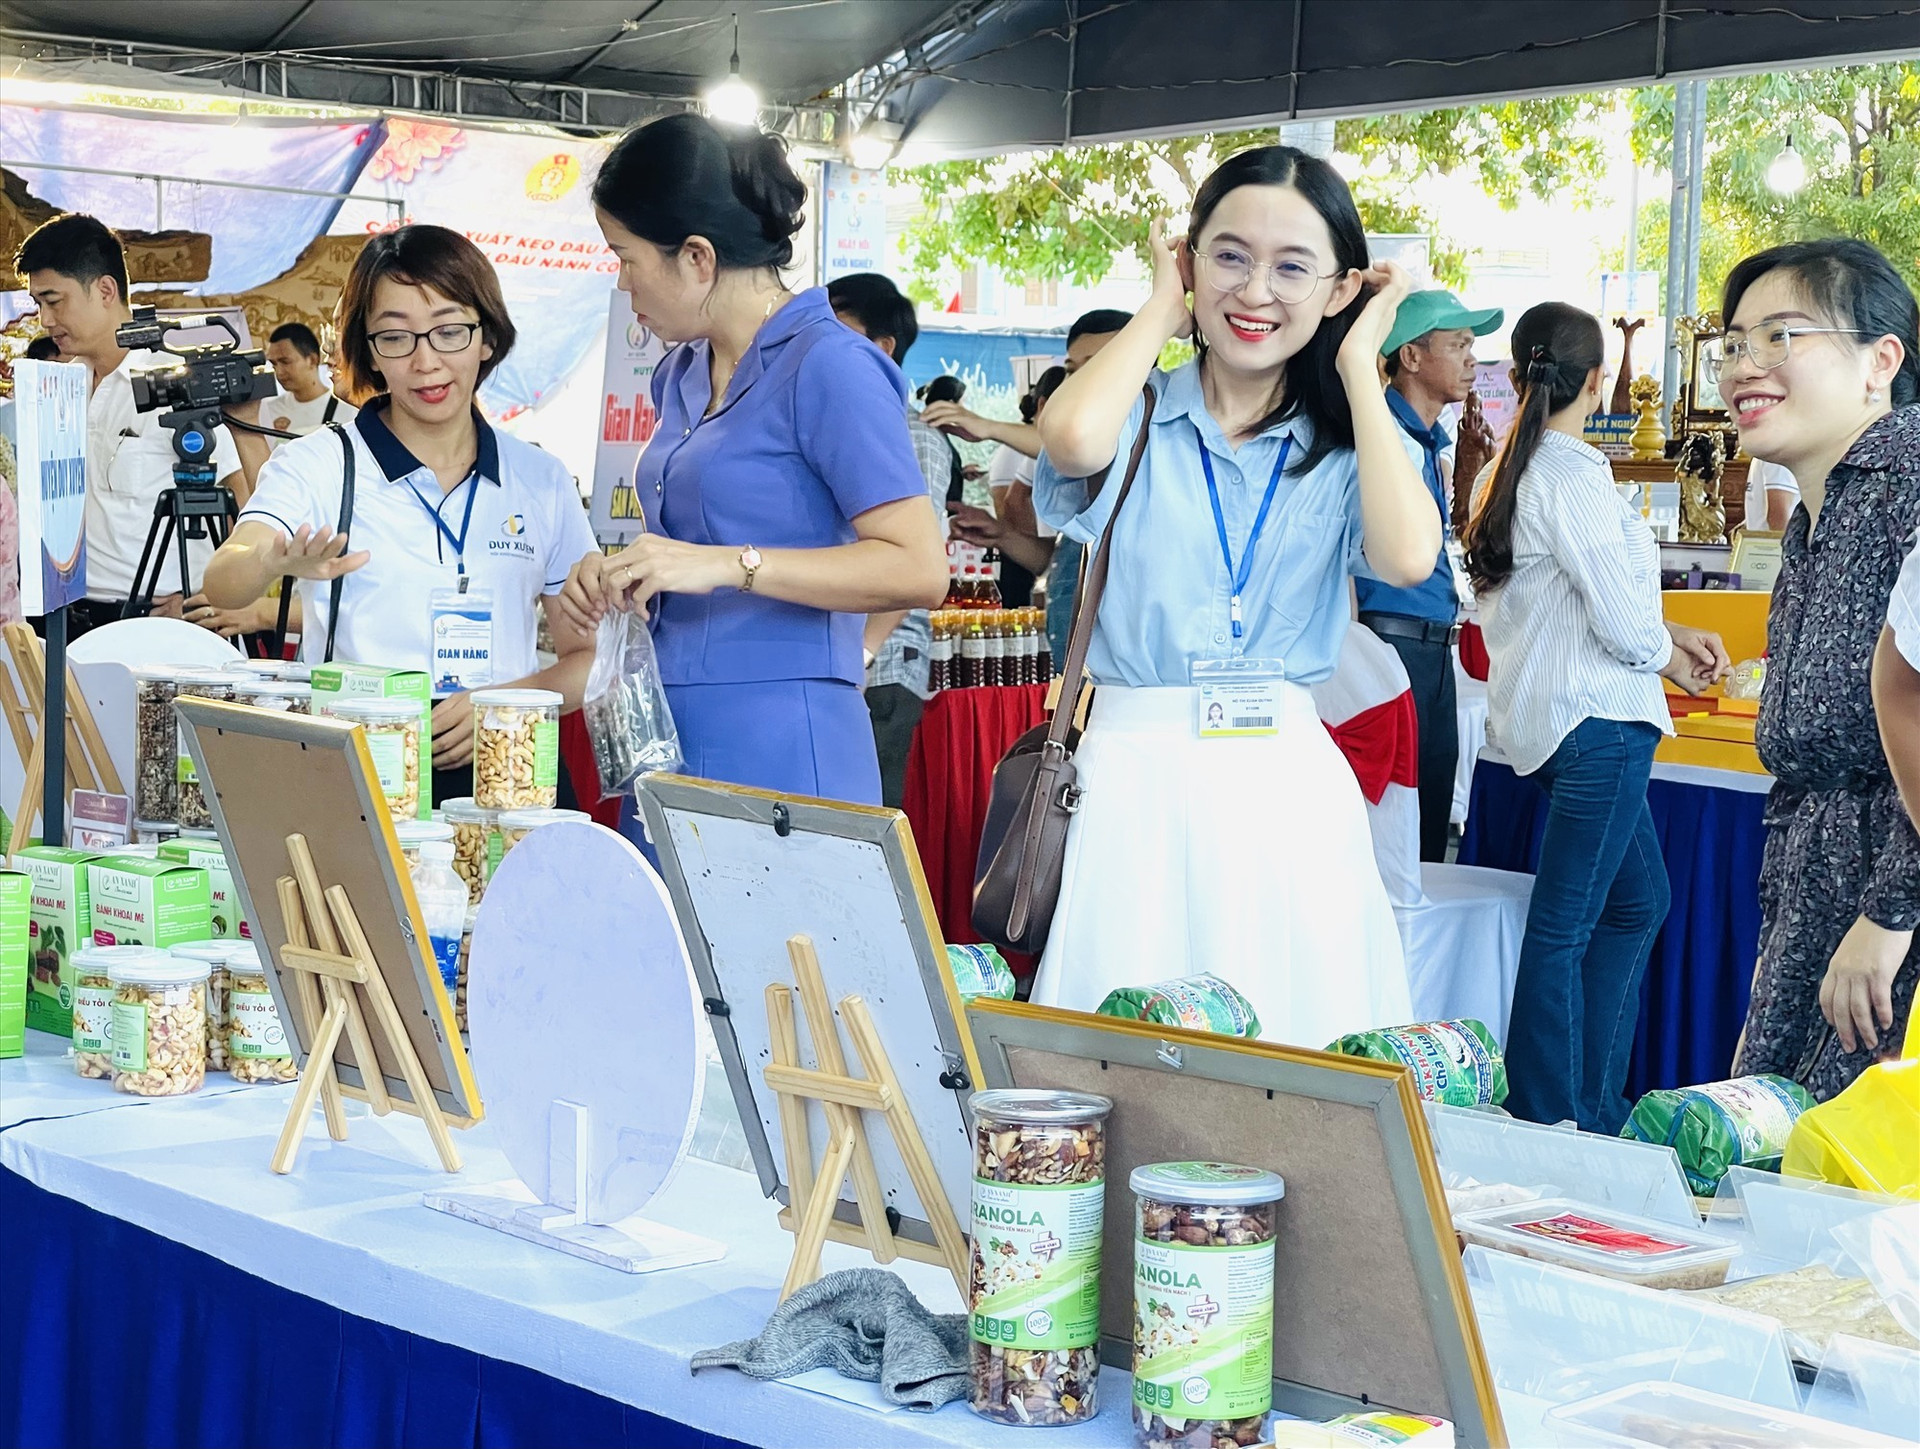 The festival is an opportunity to motivate and spread the entrepreneurial spirit among all classes of people.